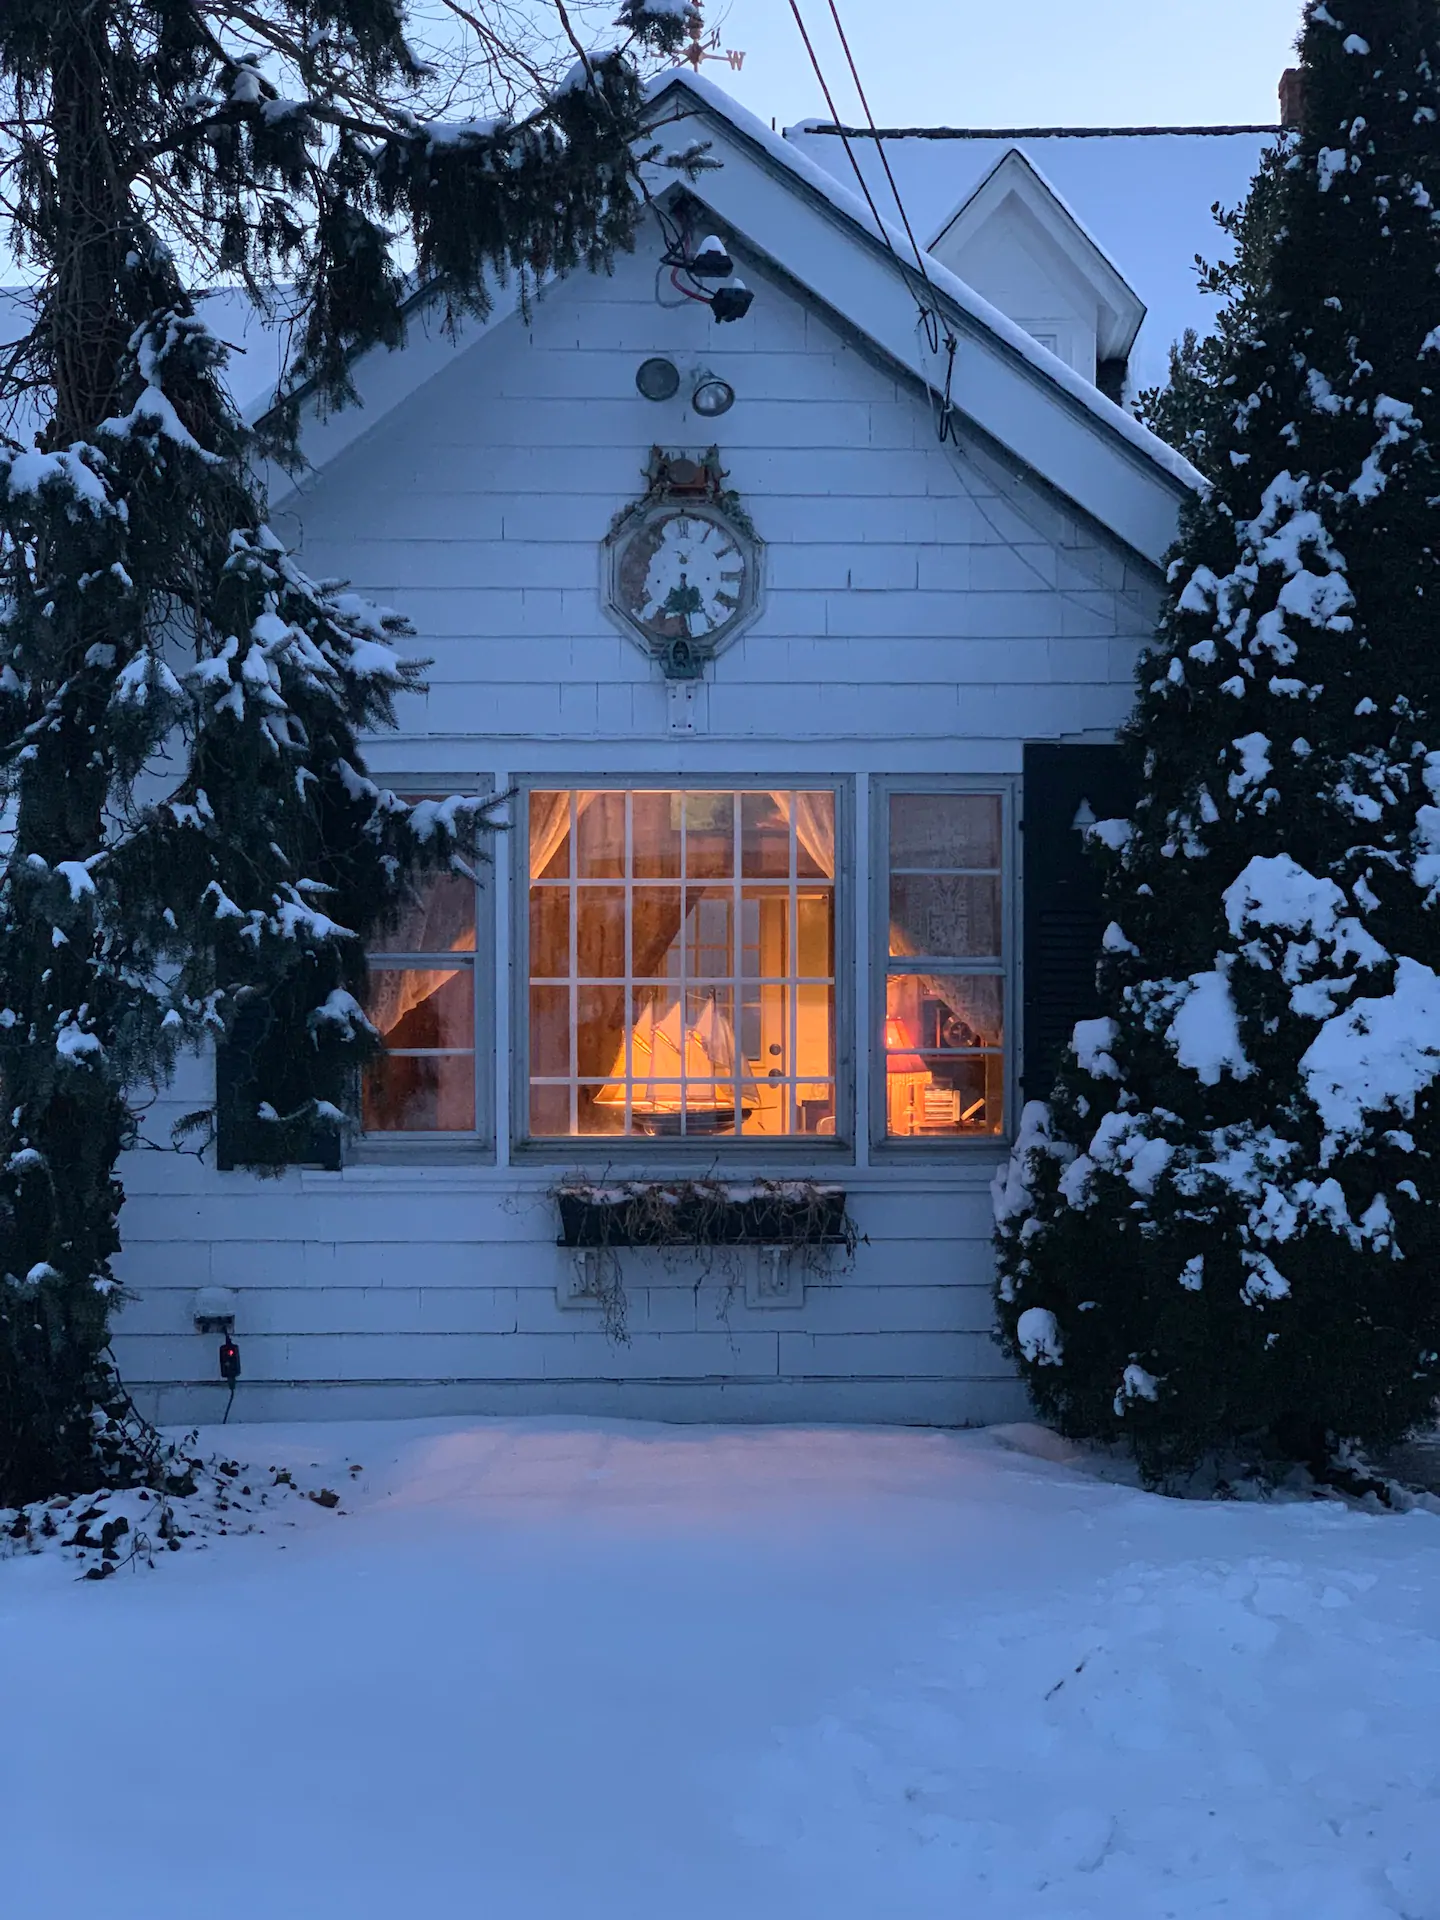 White home with large windows. Warm lighting can be seen through the windows. Snow covers the exterior of the home, as well as the trees around it.